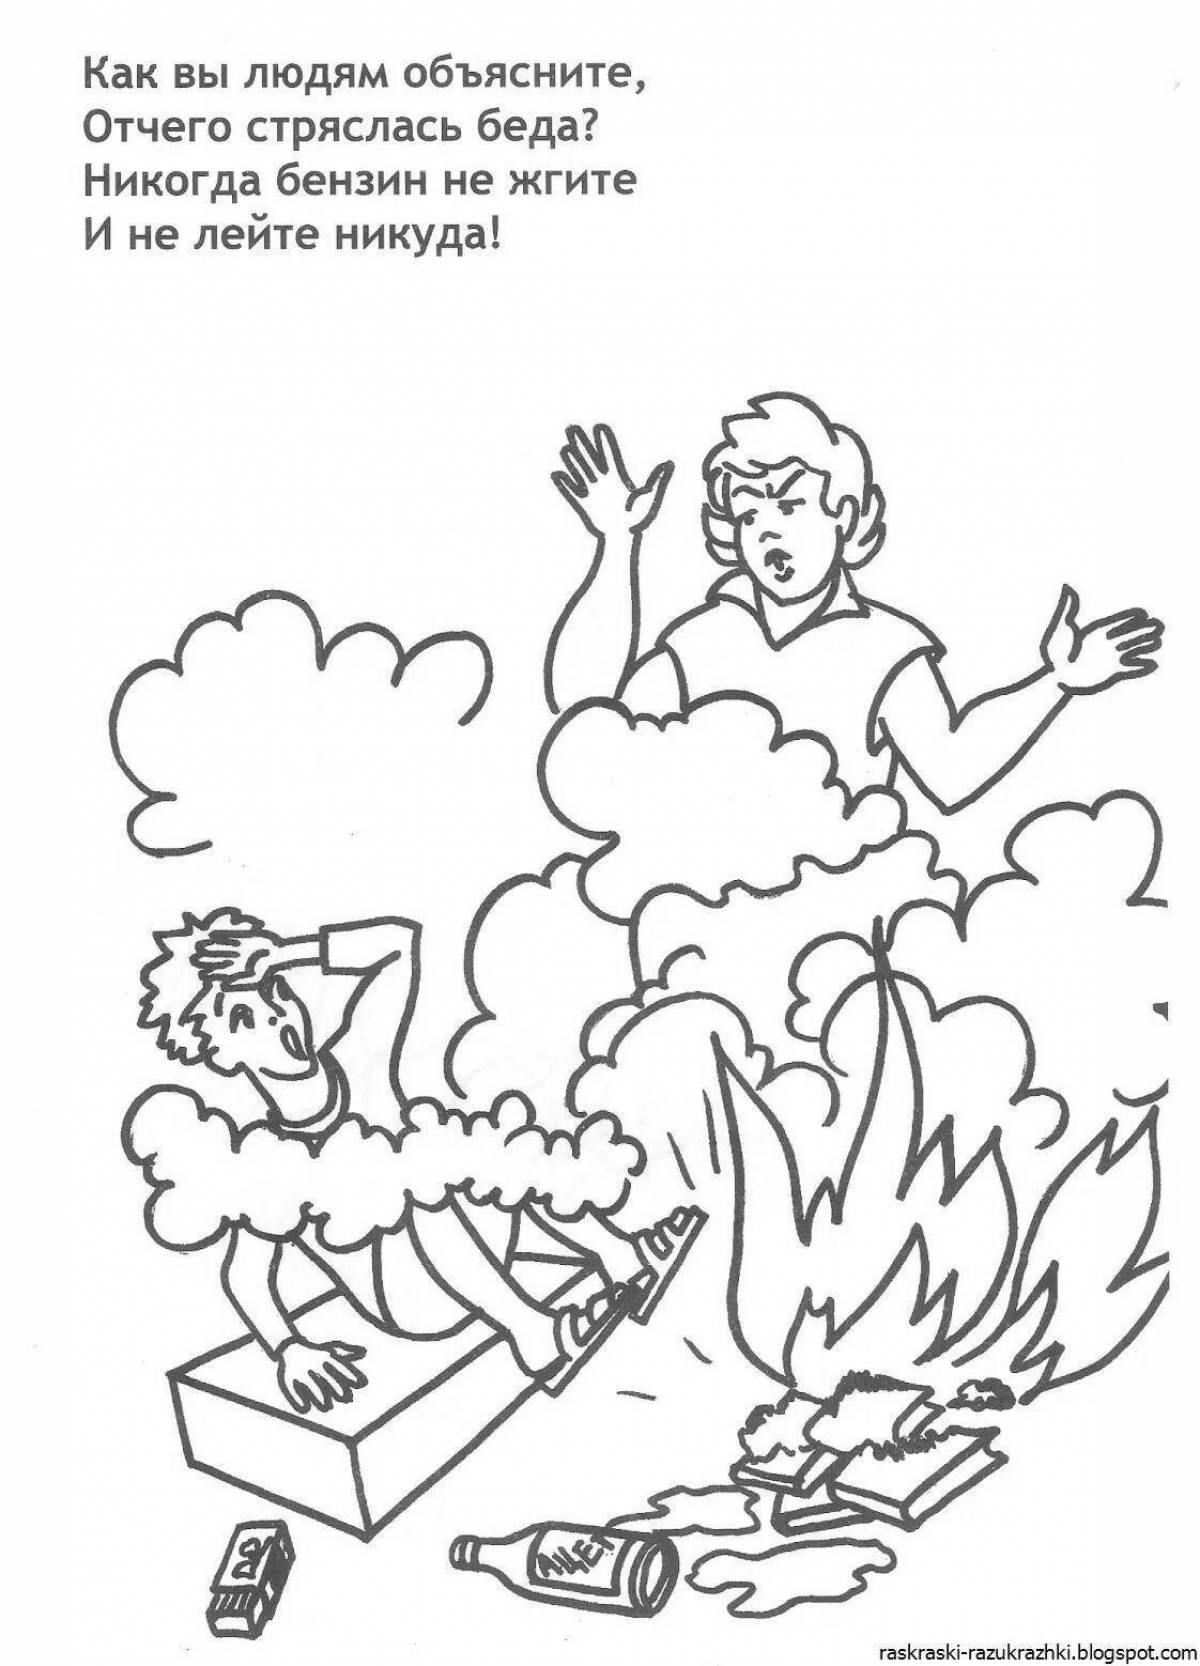 Innovative fire safety coloring book for schoolchildren